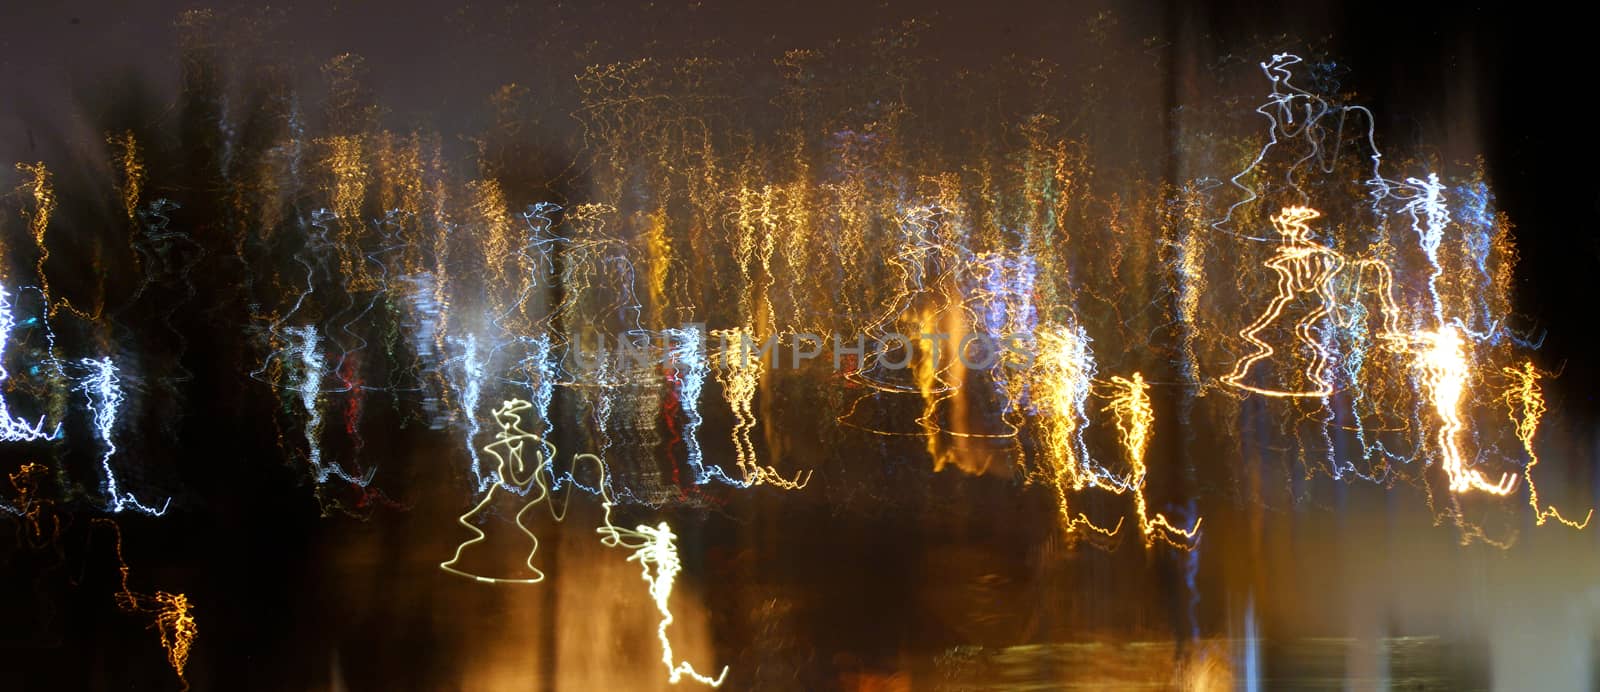 motion night lights abstract, city traffic trails effect shoot from window car, fast driving movement, abstract